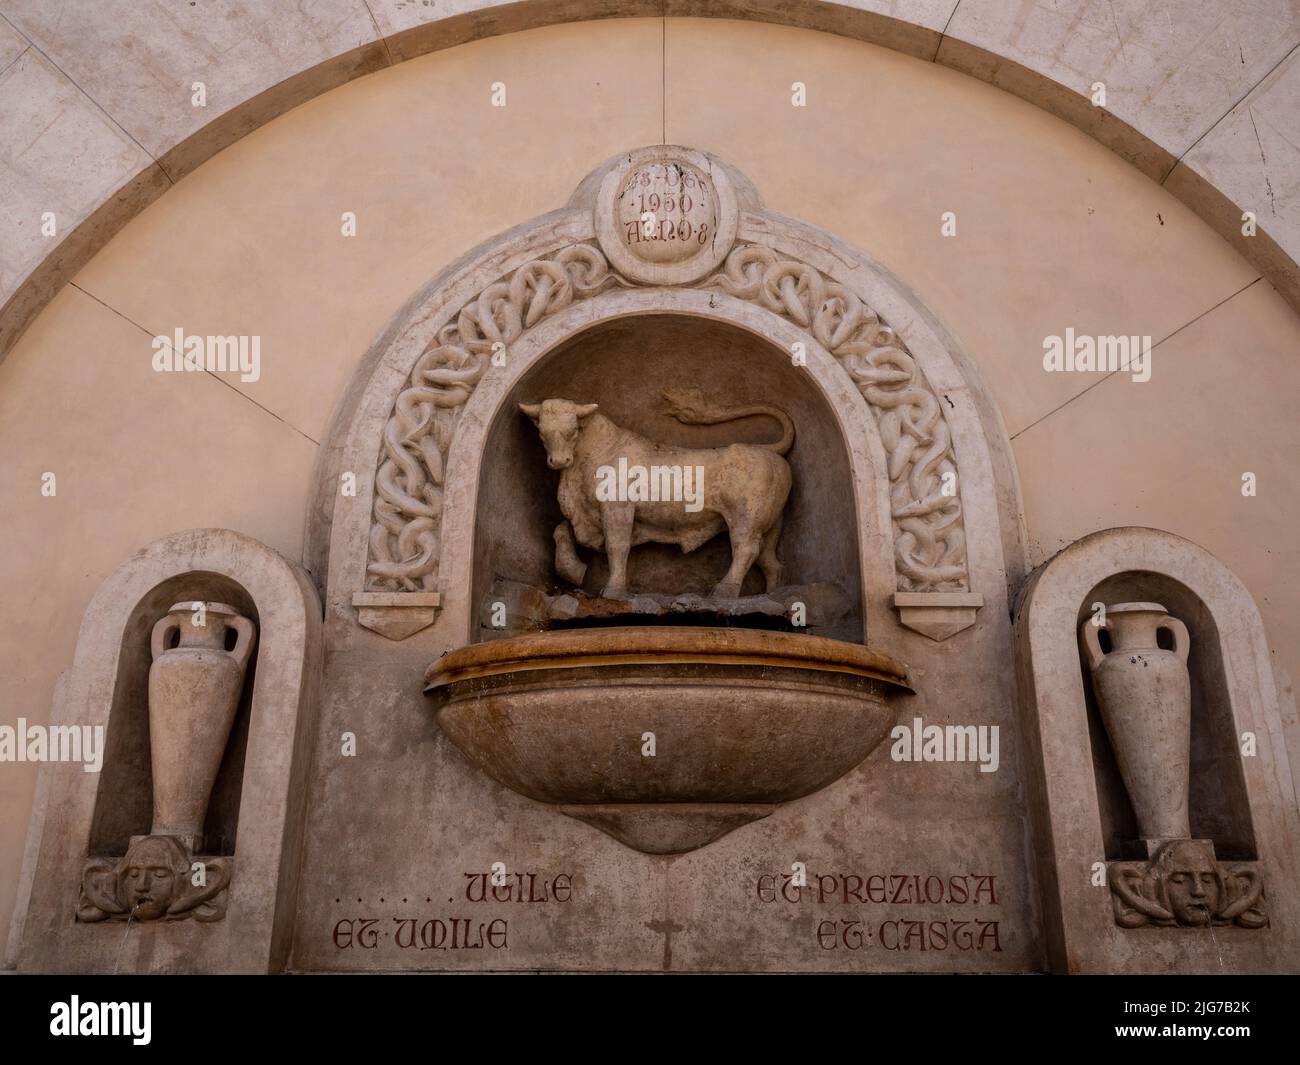 A prominent fountain in the main square of Nardo, Puglia, Italy, with a representation of a bull and 2 vases in a Fascist design from the 1930's Stock Photo